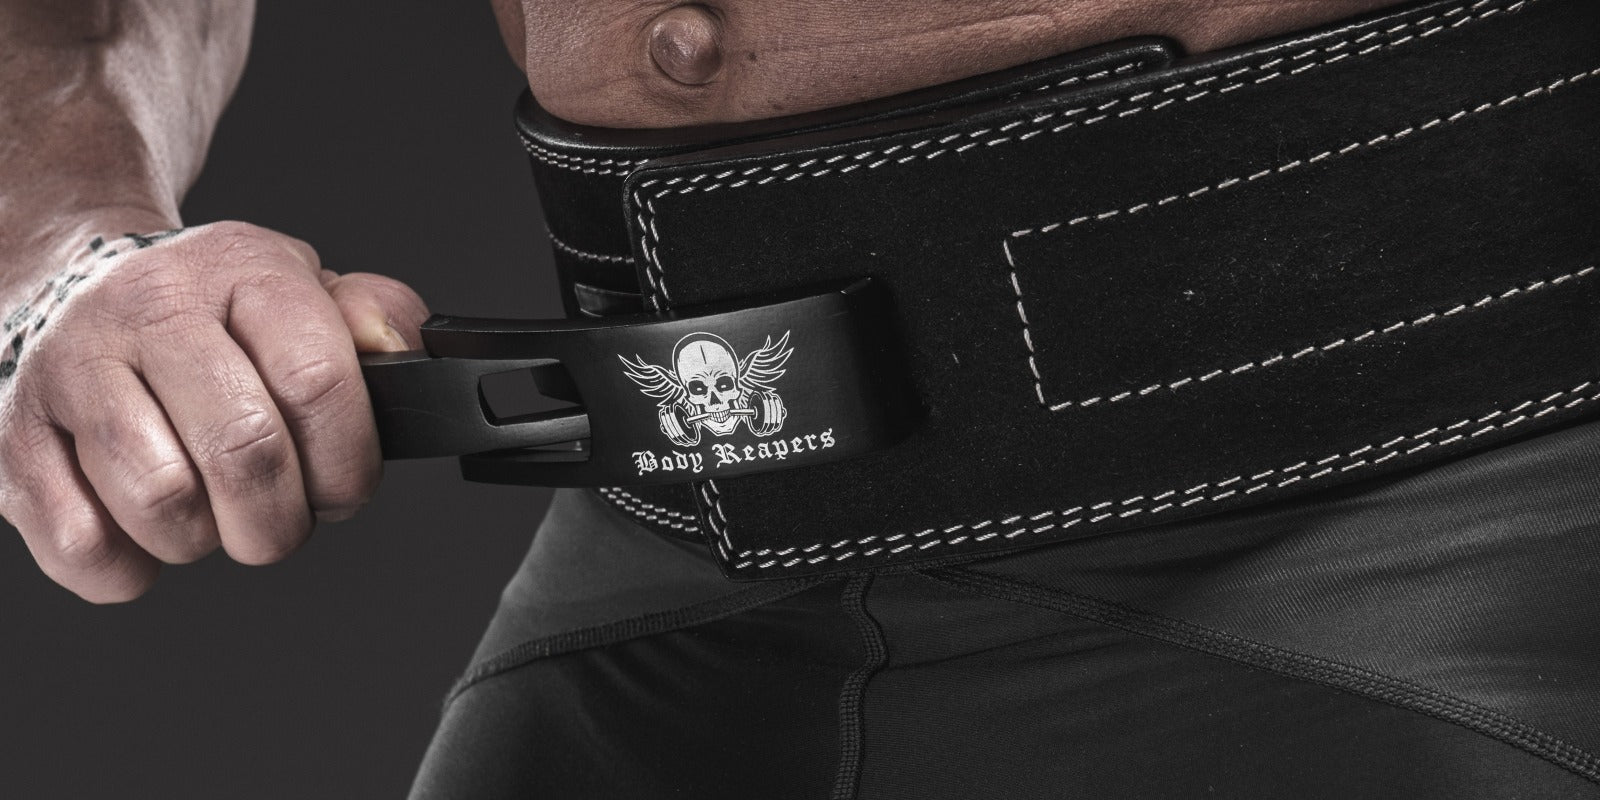 https://bodyreapers.com/products/body-reapers-powerlifting-lever-belt-13mm